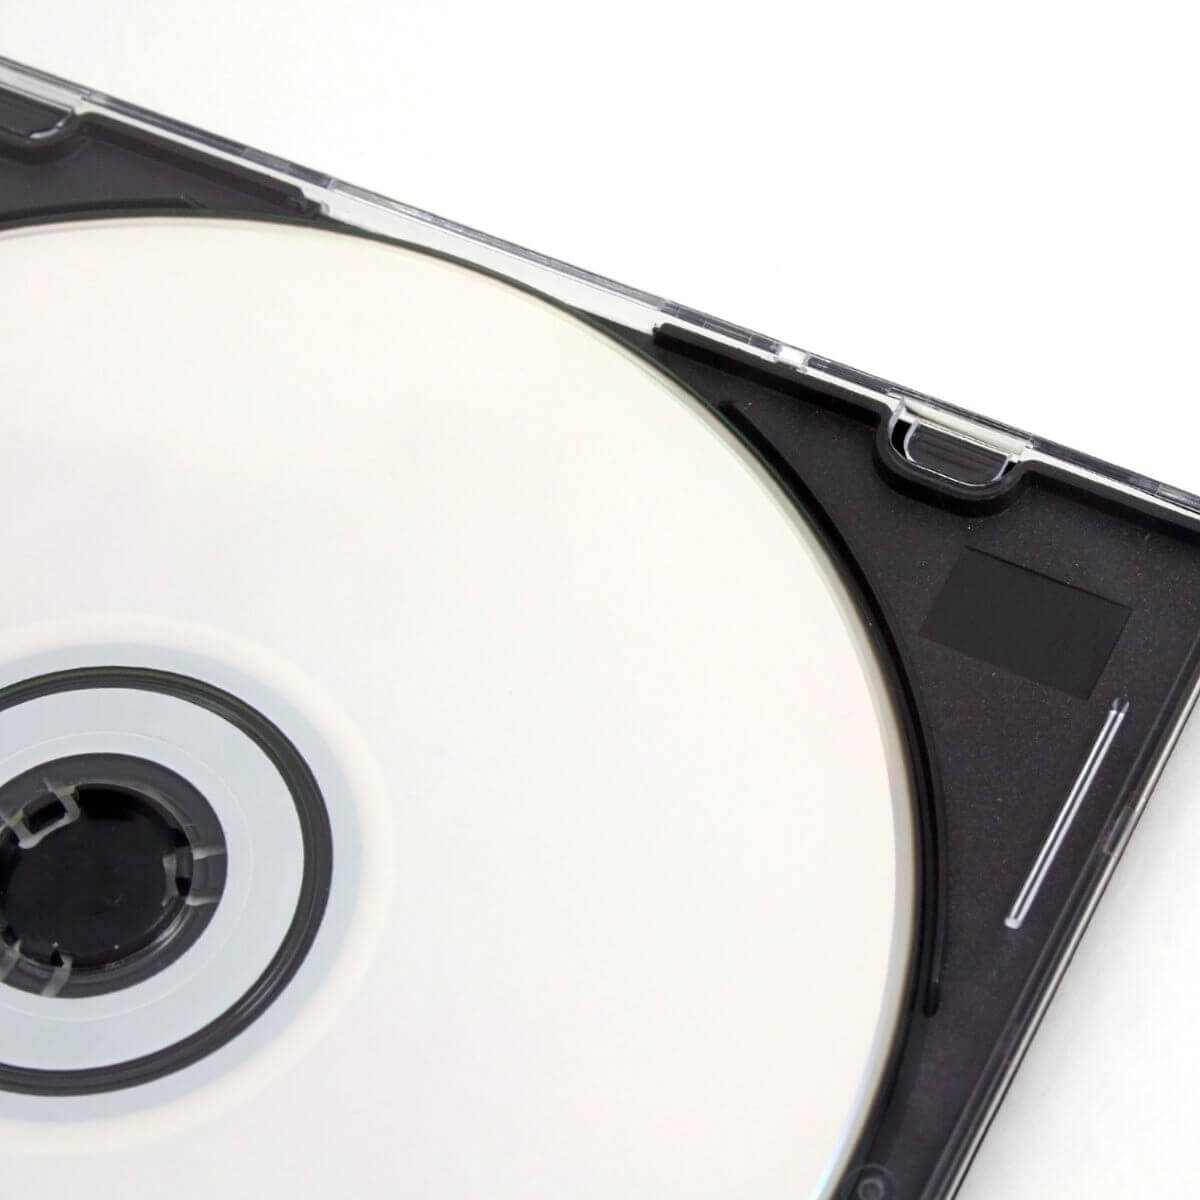 Windows Media Player cannot burn to the disc because the drive is in use